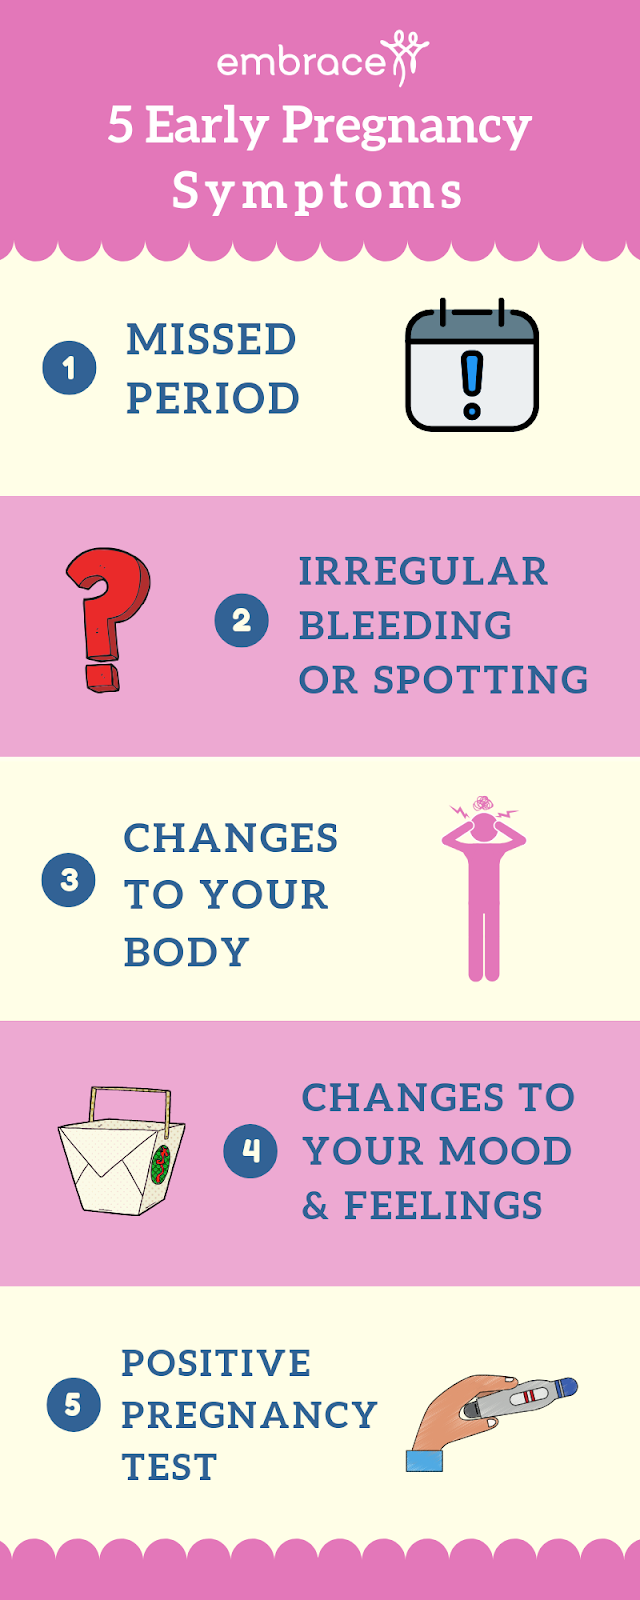 Five Must-Know Early Pregnancy Symptoms | Embrace in ...
